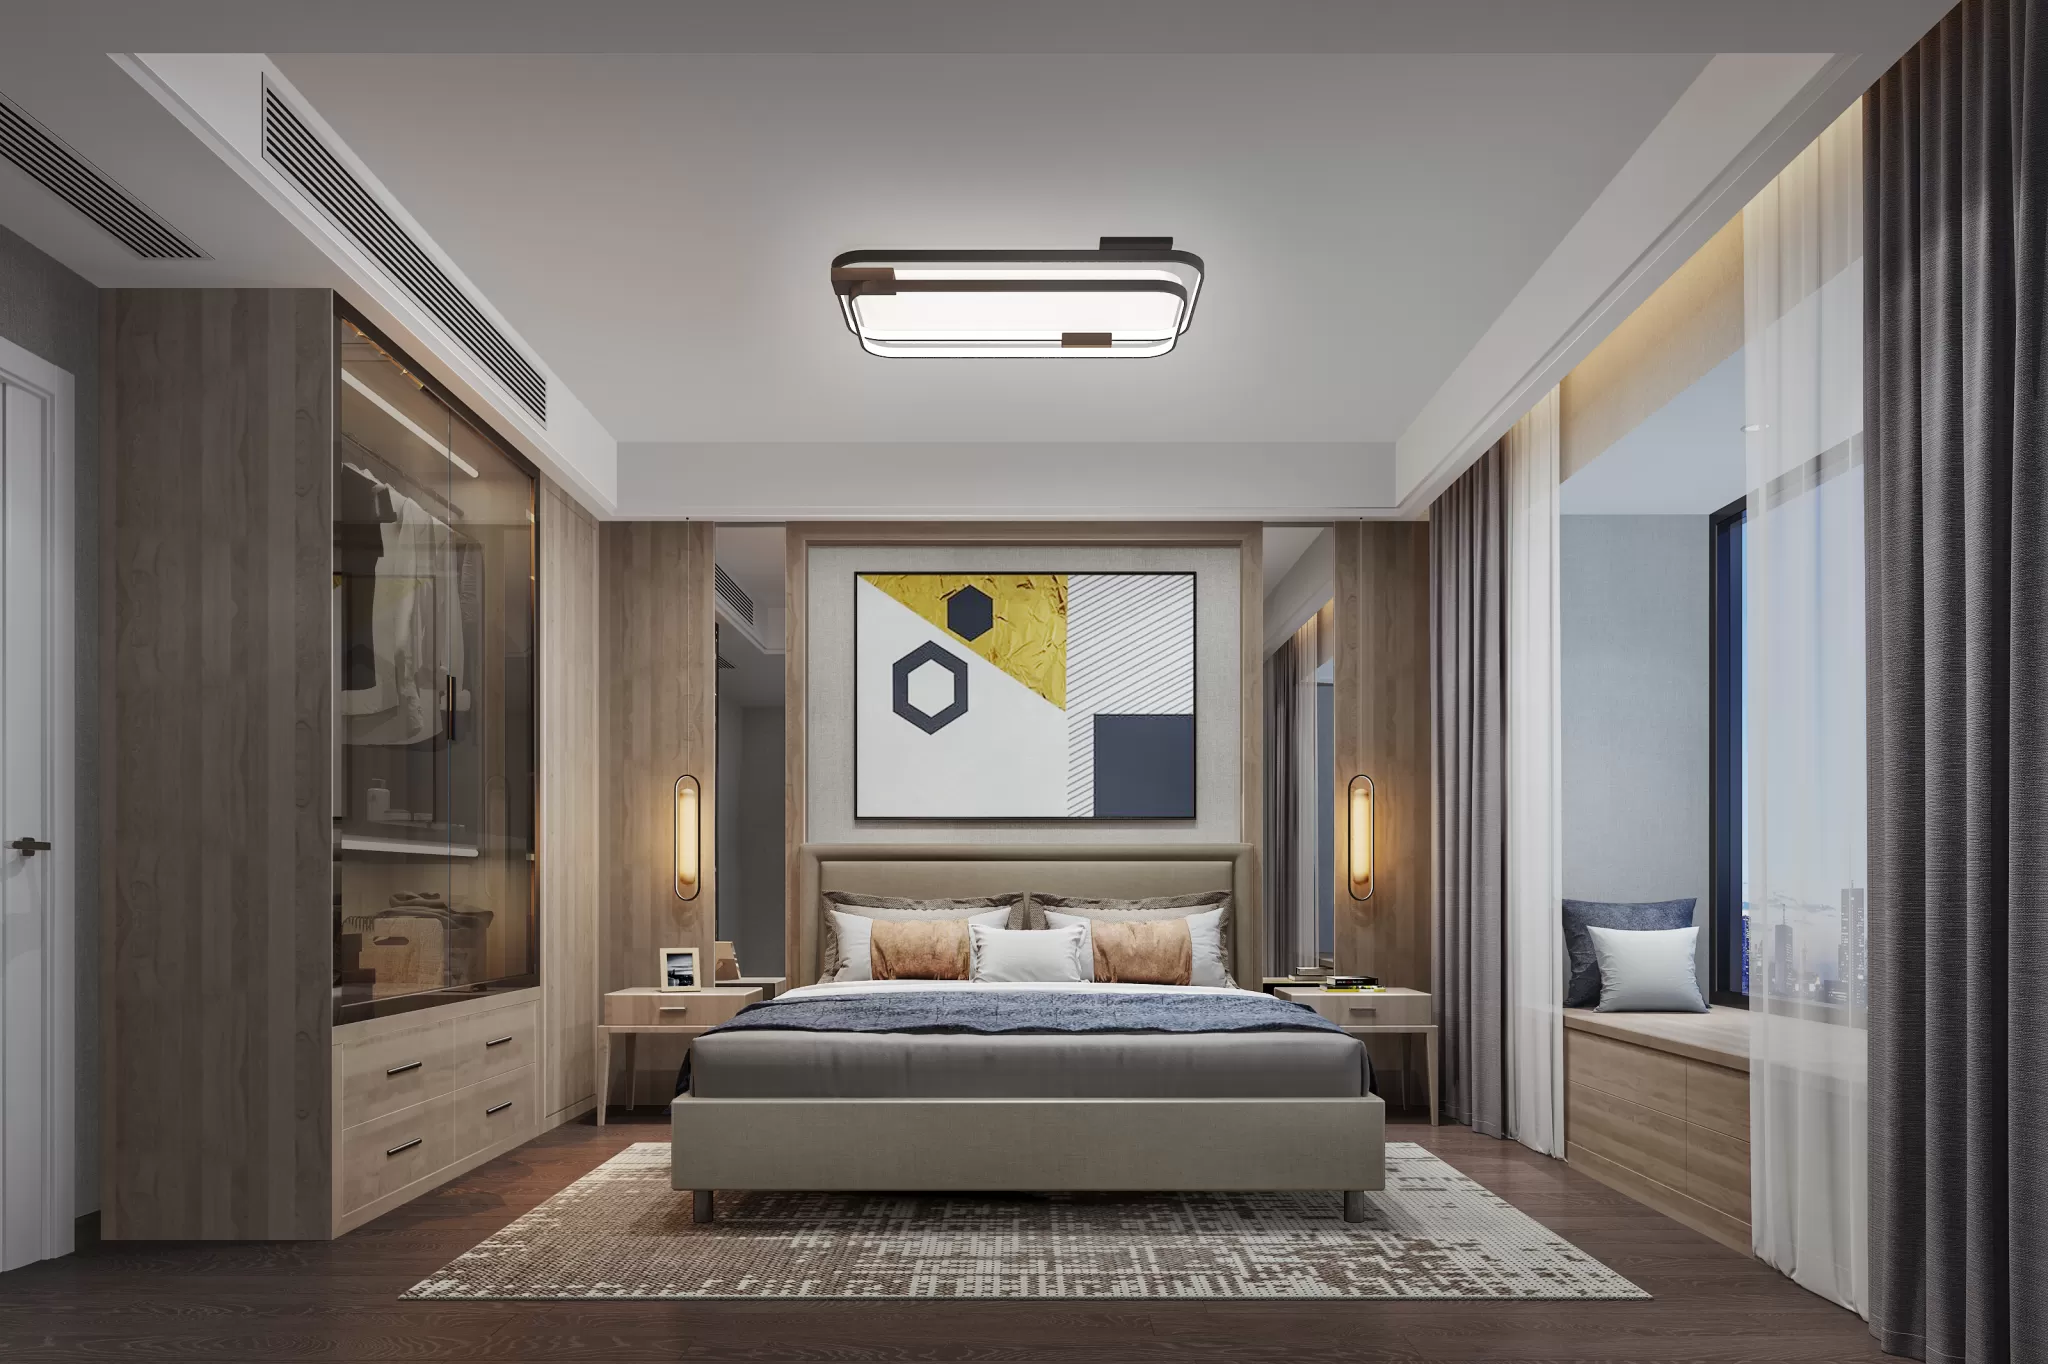 DESMOD INTERIOR 2021 (VRAY)/5. BEDROOM – 2. CHINESE STYLES – 134